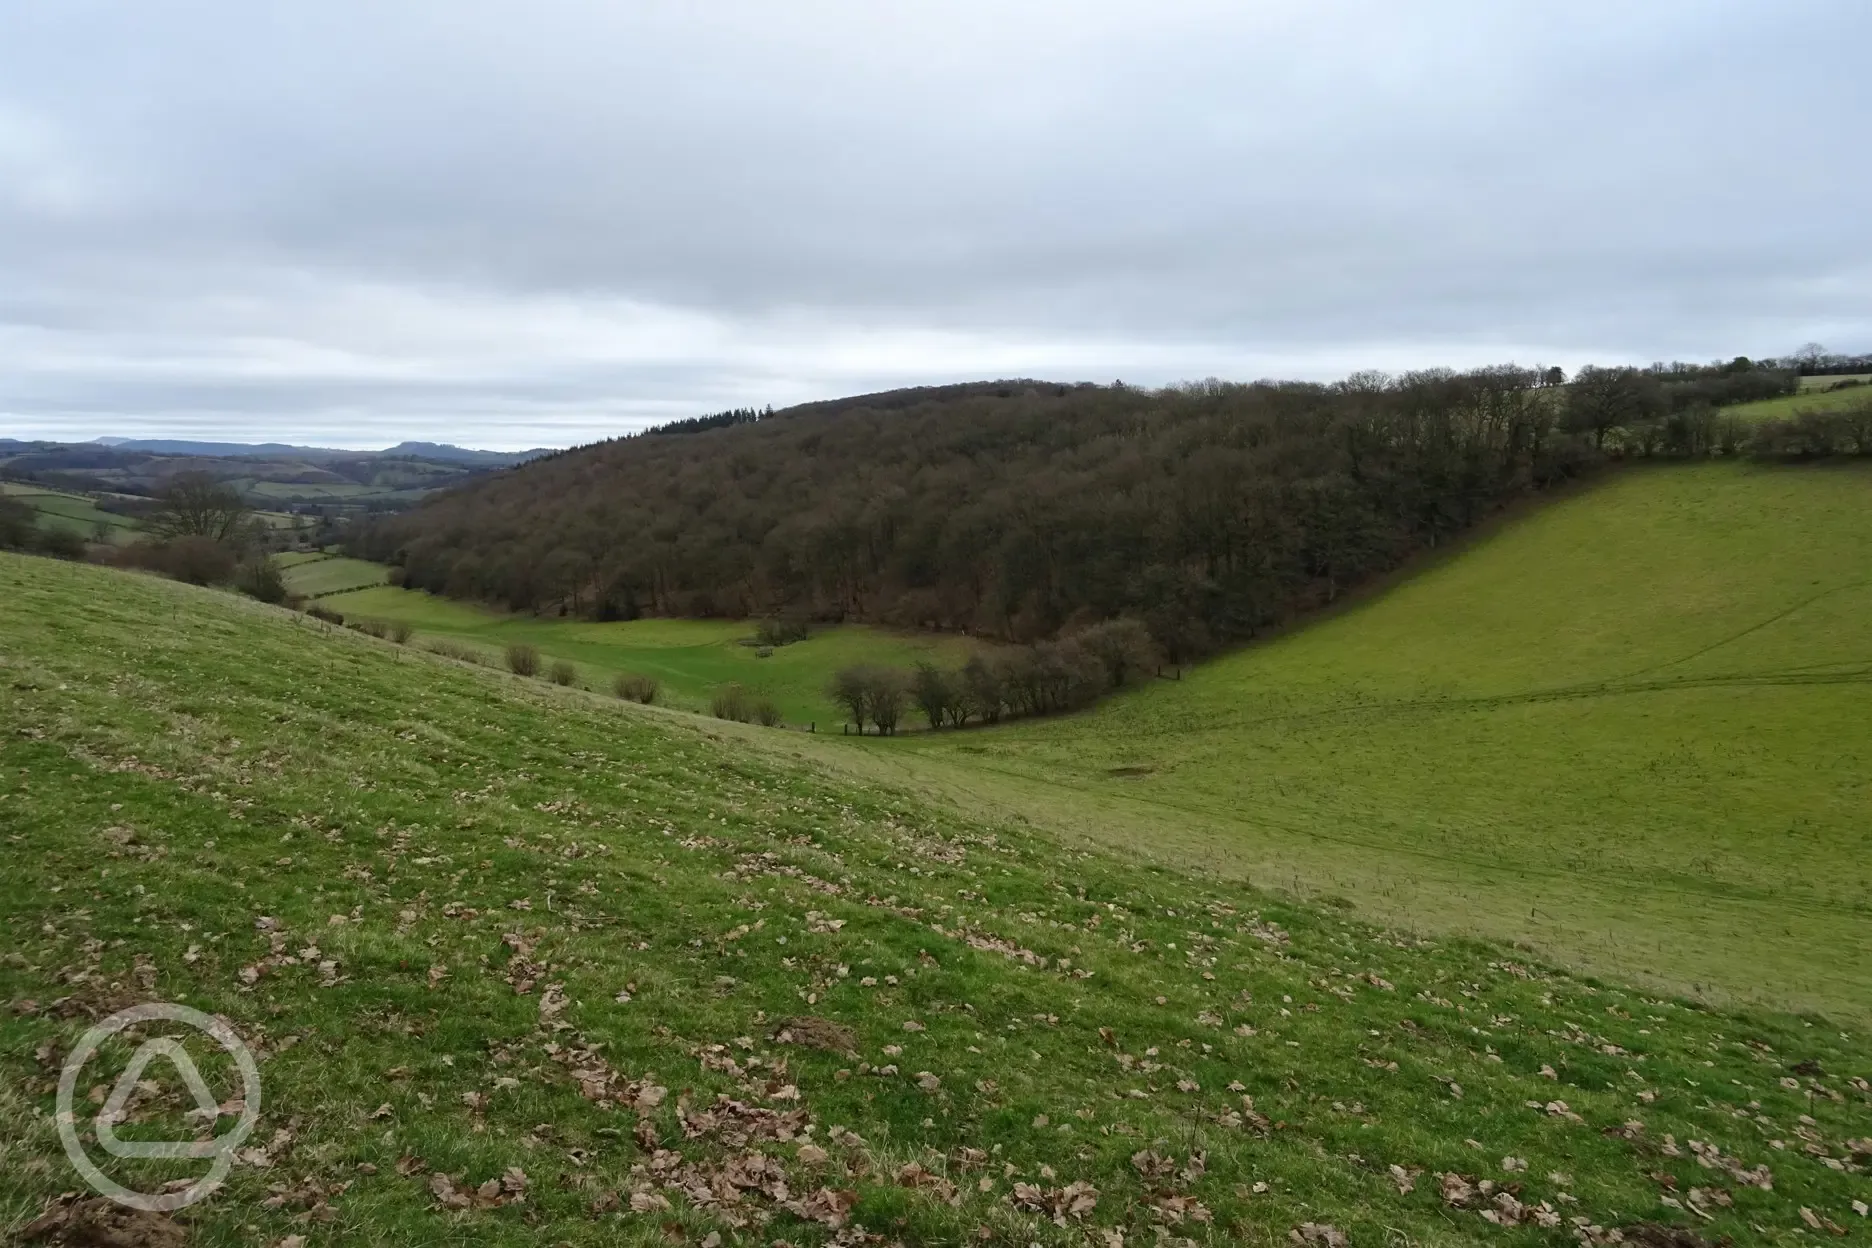 View towards Willey Lane Wood